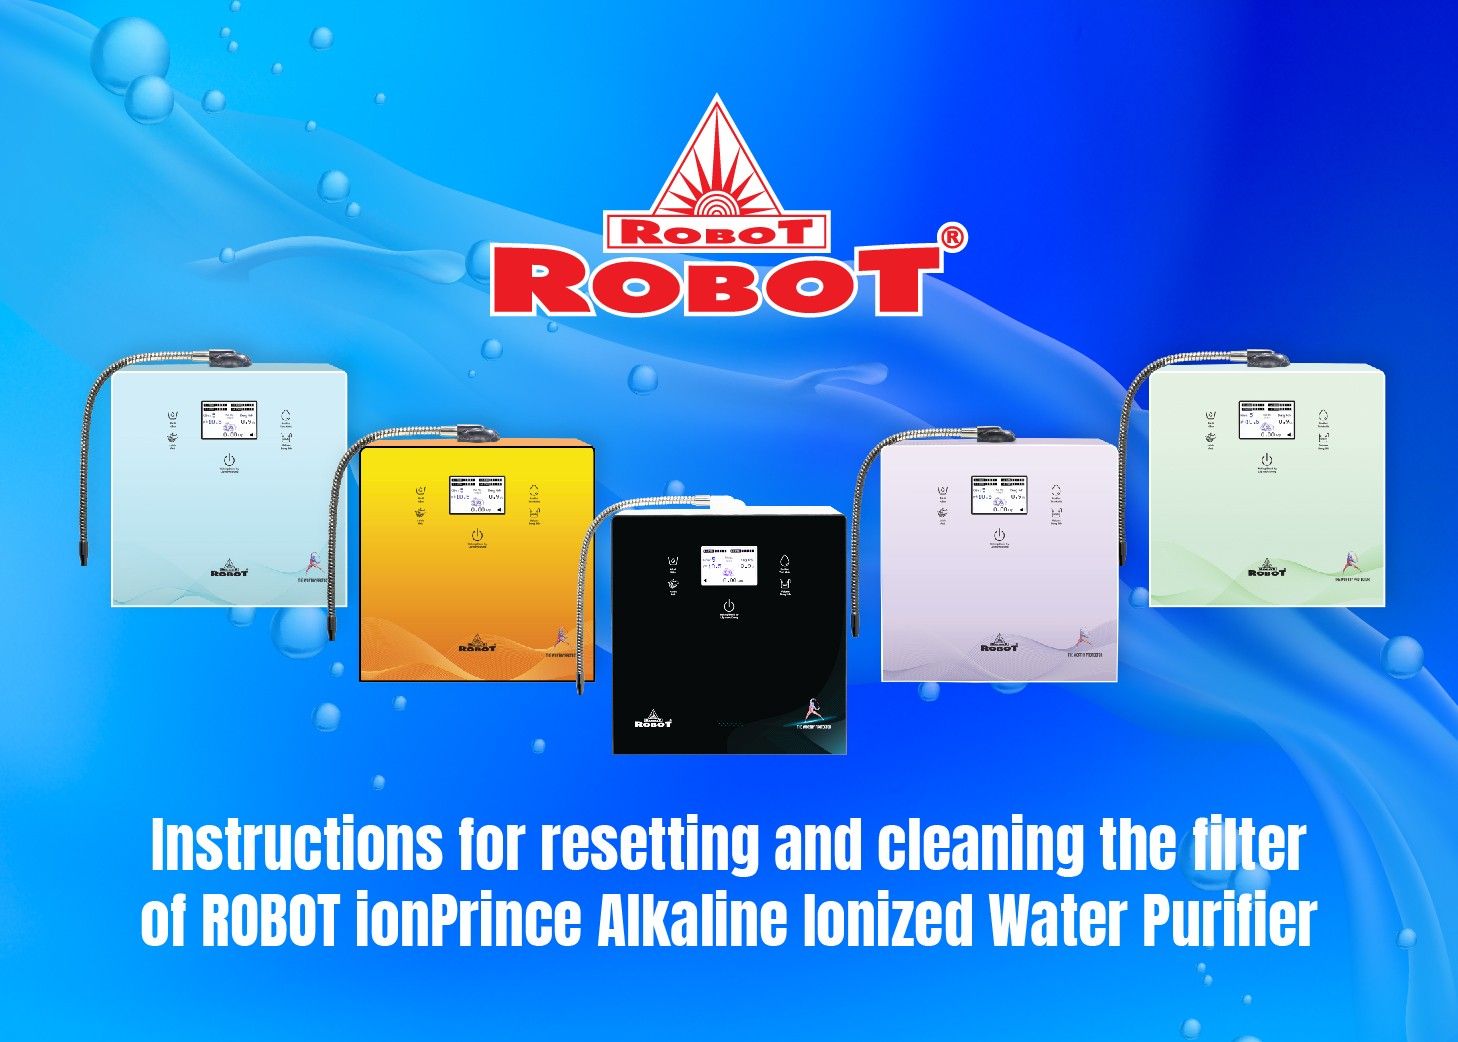 Instructions for resetting and cleaning the filter of ROBOT ionPrince Alkaline Ionized WaterPurifier